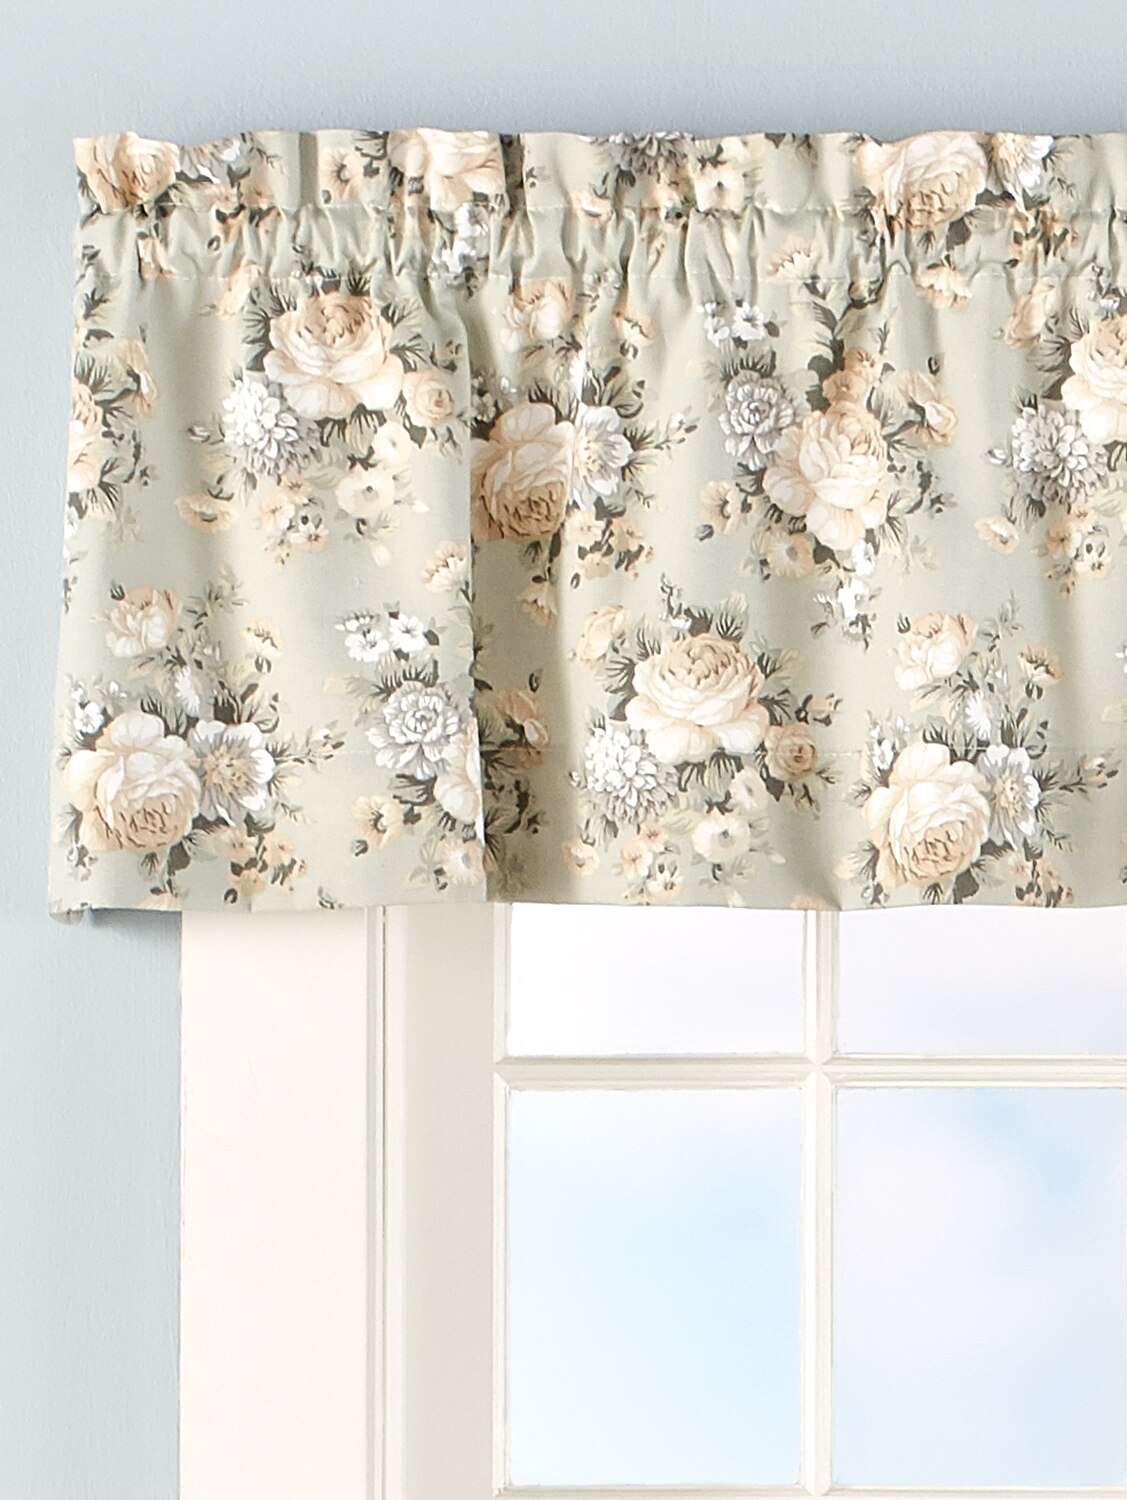 Details about   2 PC Panel Drapes Natural Indoor Window Floral Printed Curtain Valances Tapestry 